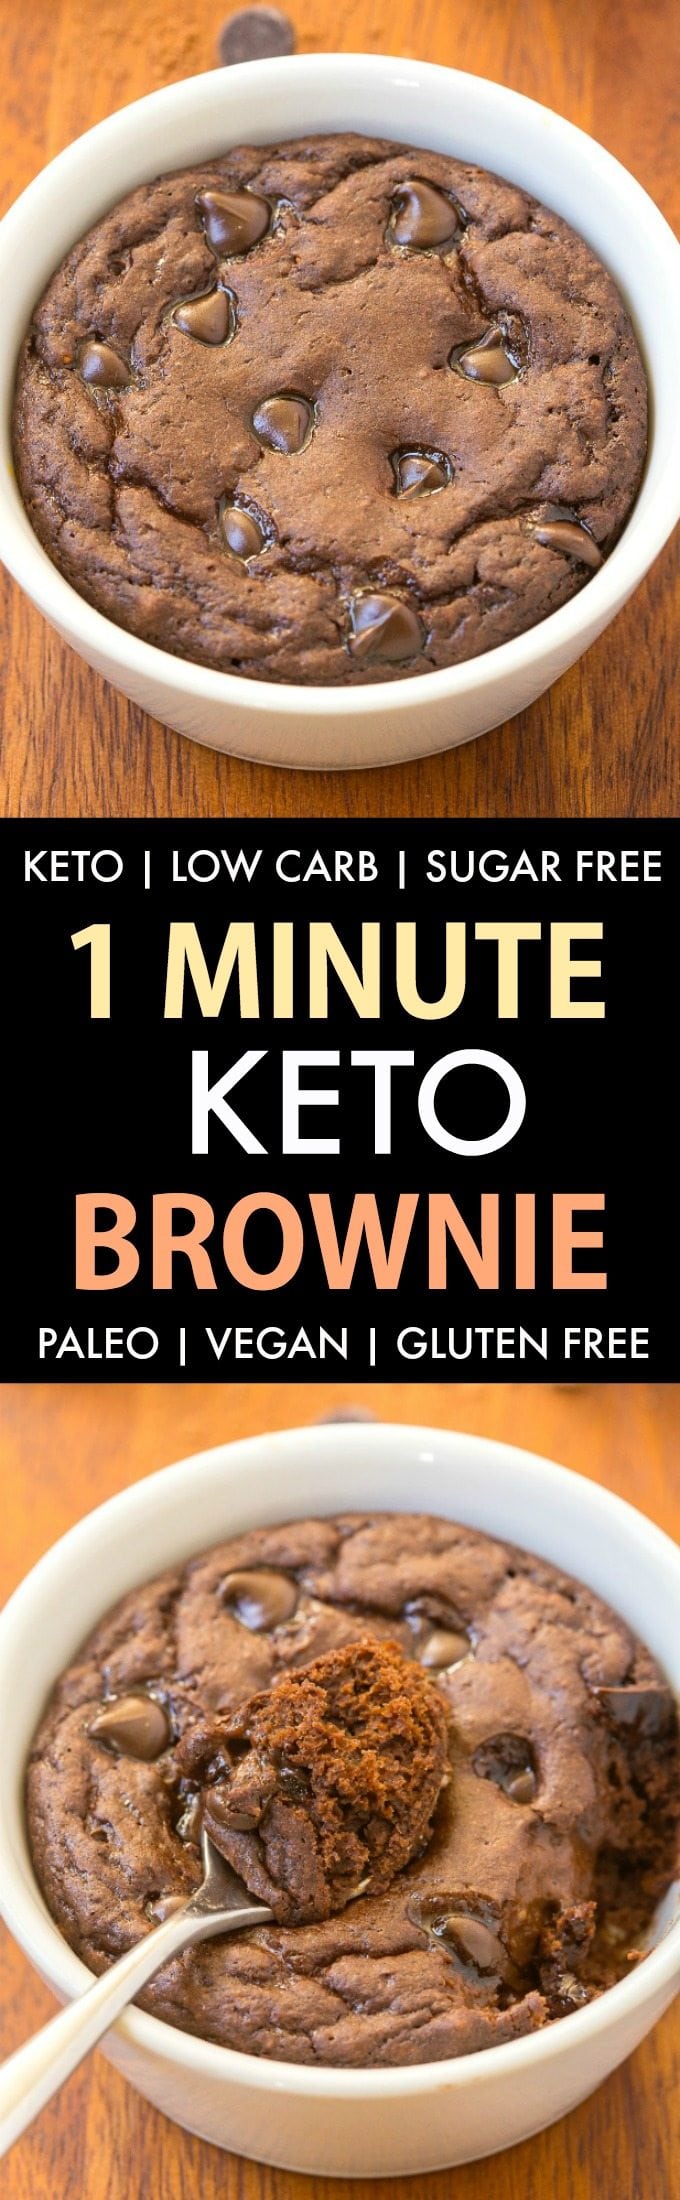 1-Minute Keto Brownie (Paleo, Vegan, Sugar Free, Low Carb)- An easy mug brownie recipe which takes one minute and is super gooey, moist and packed with protein- Tastes so fudgy! #keto #ketodessert #ketorecipe #brownie | Recipe on thebigmansworld.com